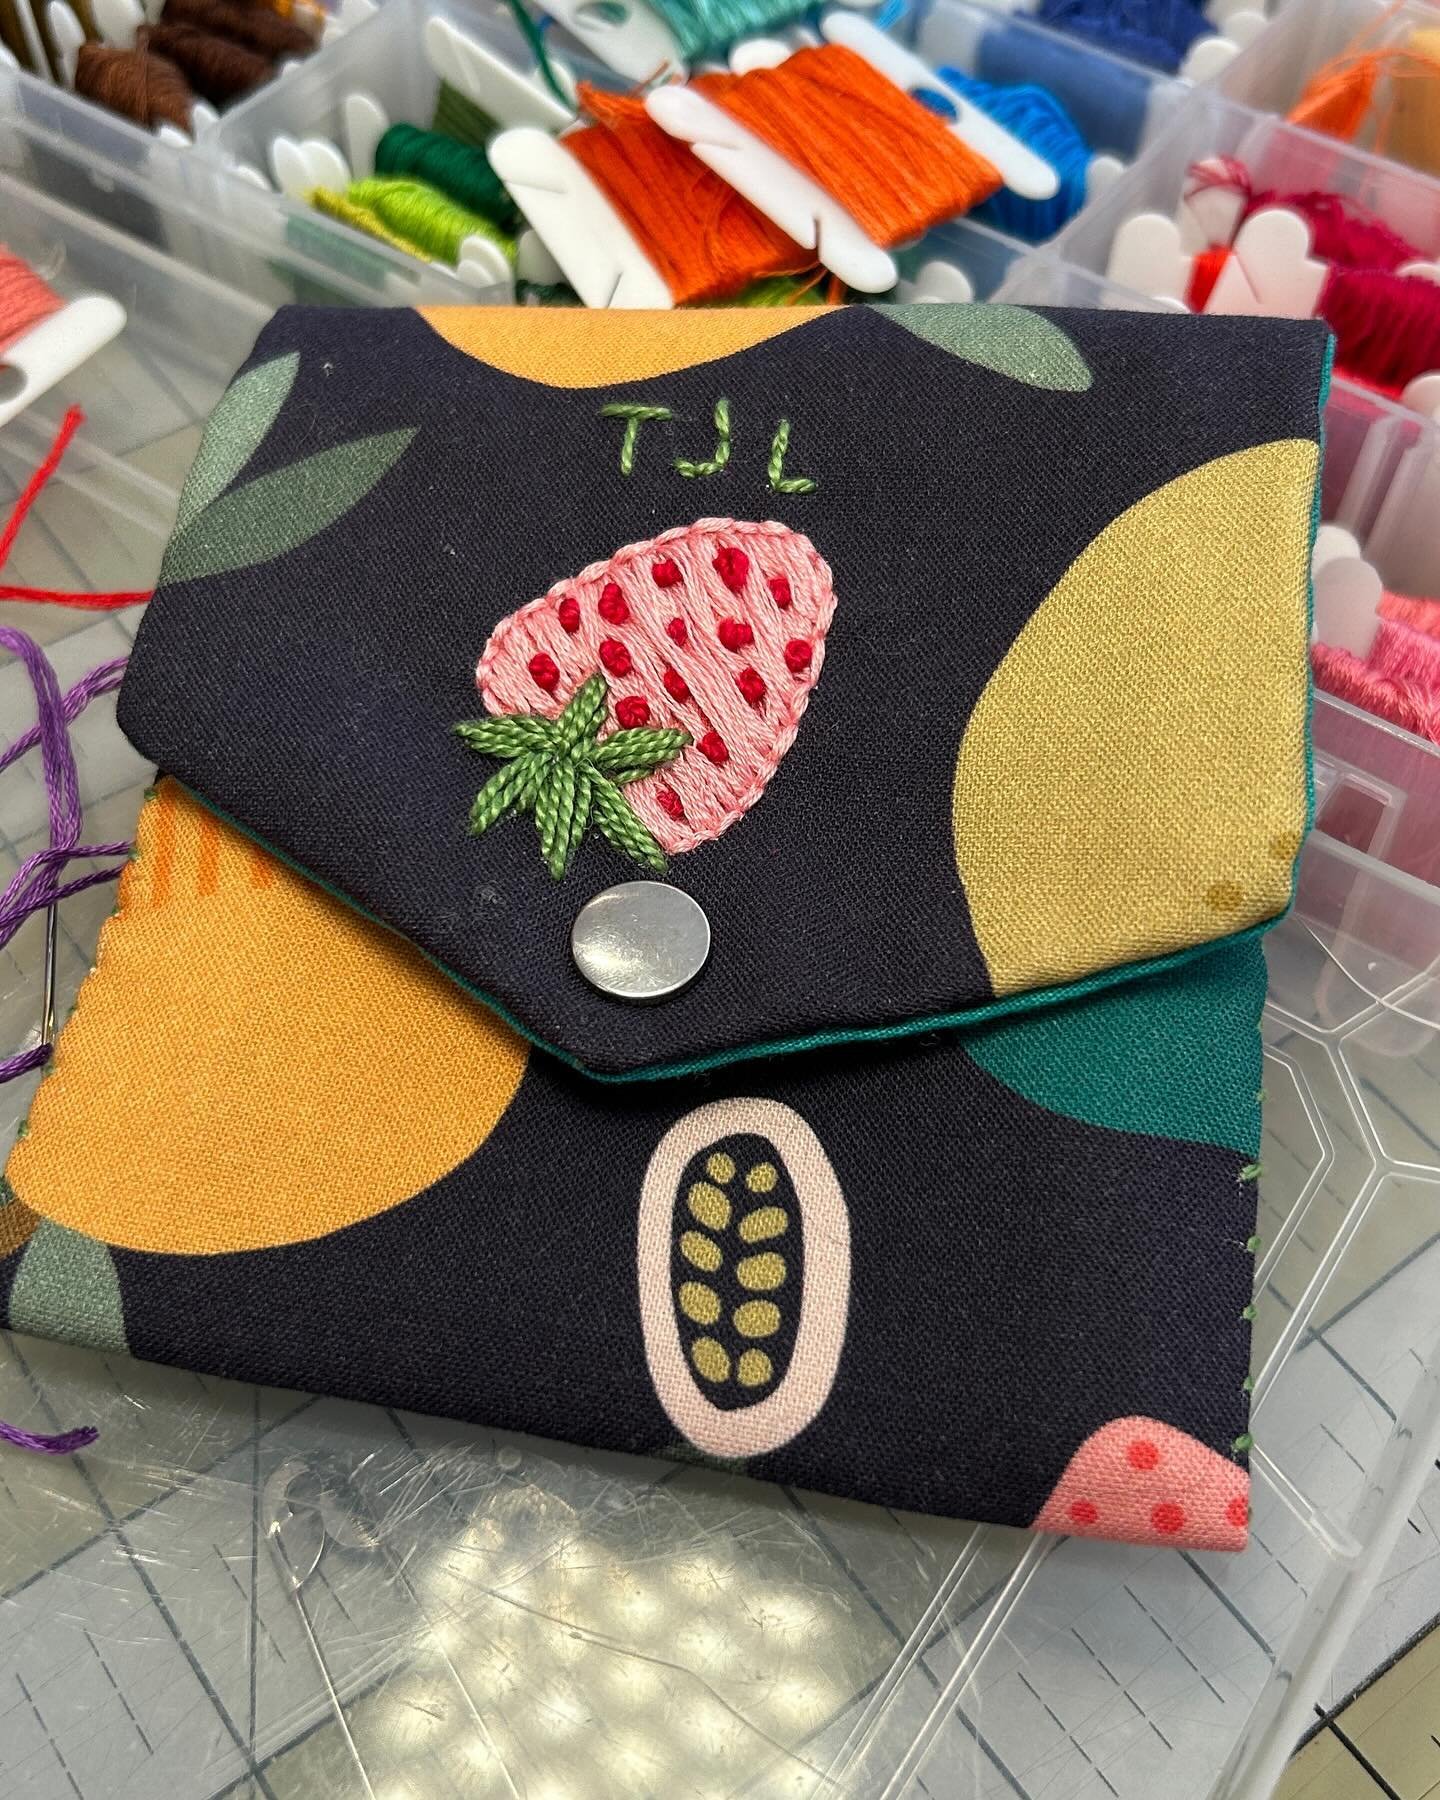 Sweetest little hand sewn and embroidered pouch. Our youngest hand sewing students are sewing this project.🧵🪡💕

#handsewn
#learntosew
#centralstreetevanston 
#learntoembroider 
#memade
#chicagonorthshoremoms 
#chicagoparent 
#chicagolife